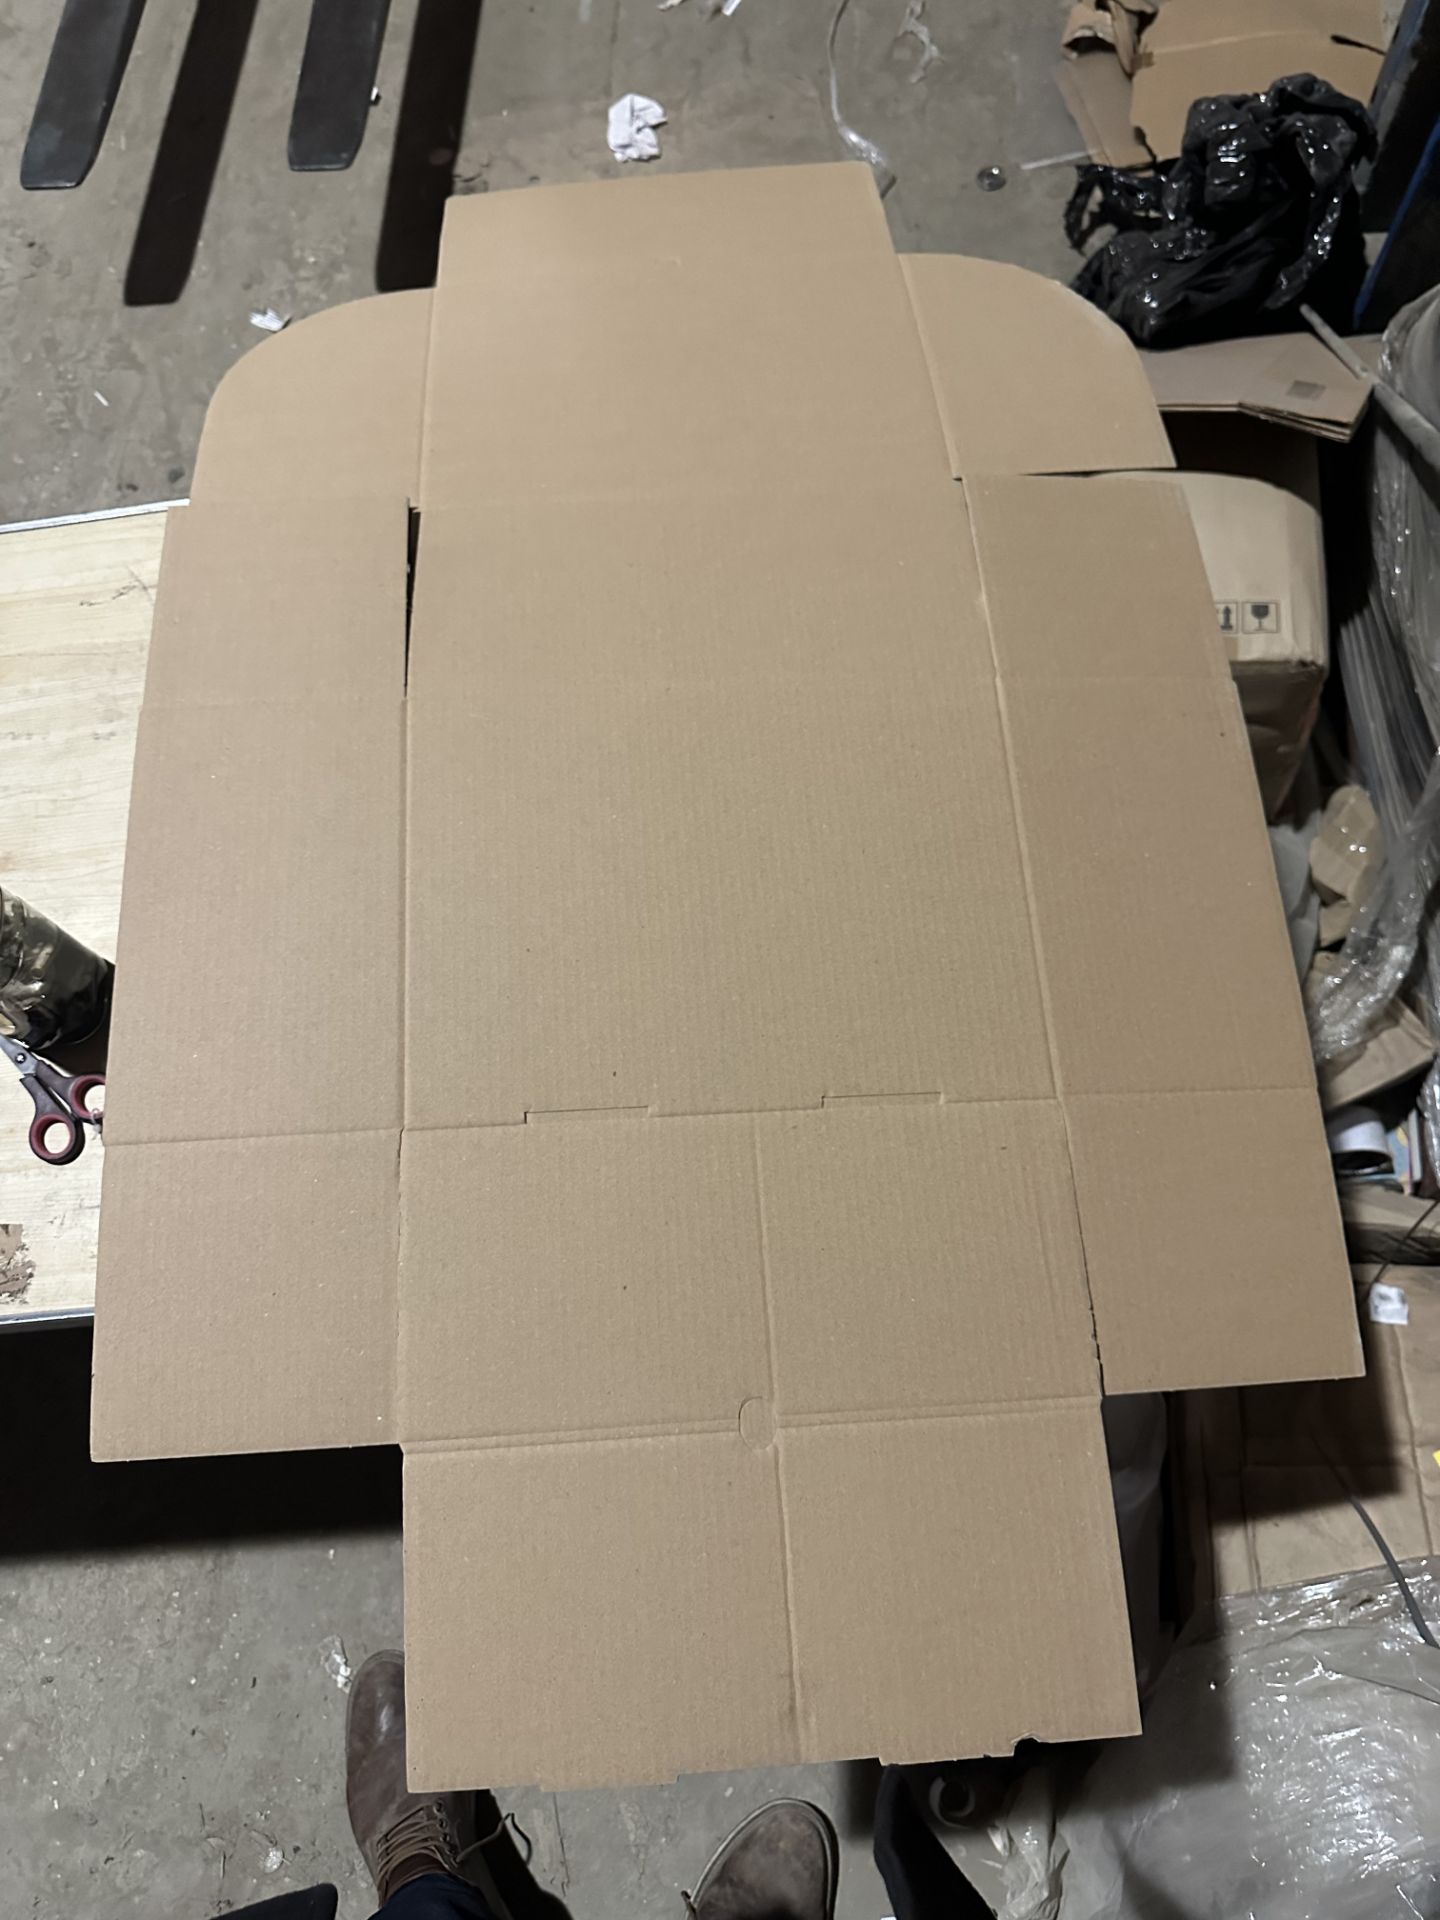 HALF PALLET OF FOLDABLE CARDBOARD BOXES FOR PACKAGING - Image 4 of 4